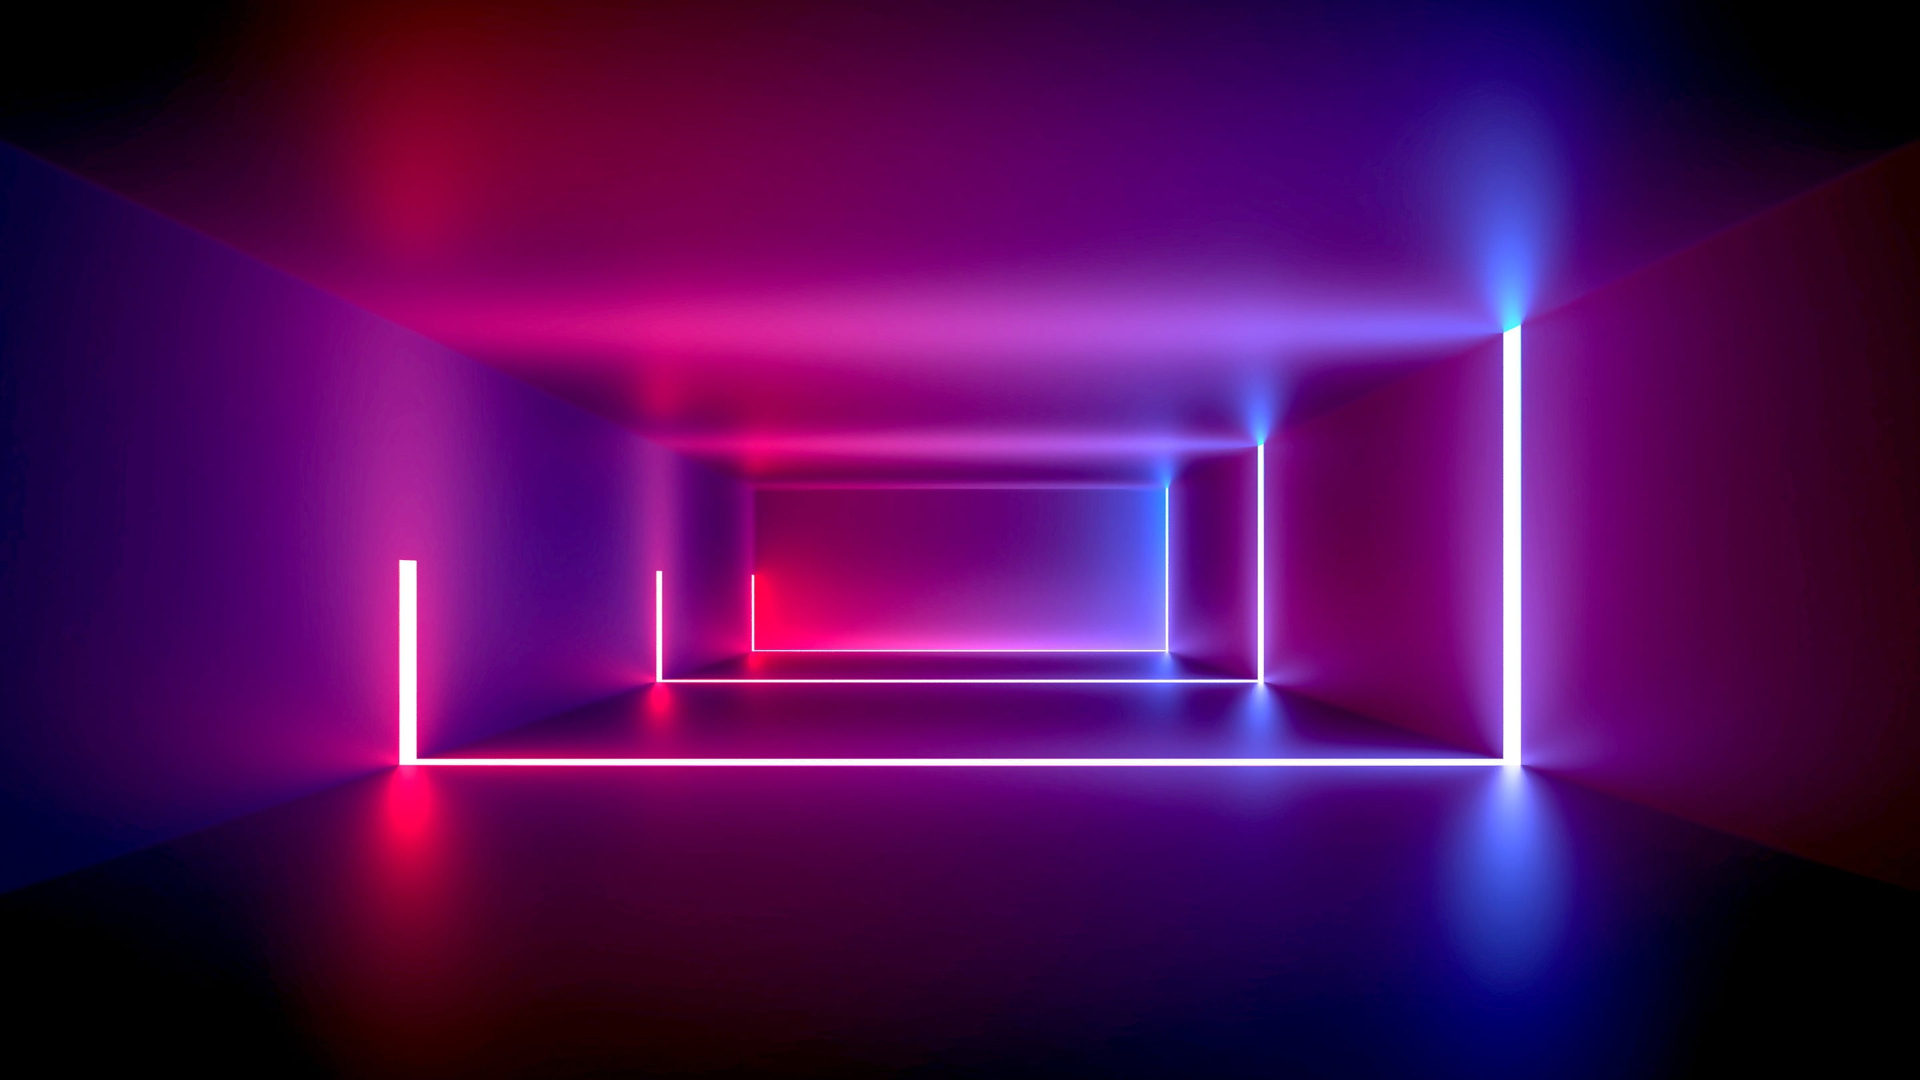 Abstract Neon Neon Glow Lights Pink Purple 3D Abstract 1920x1080